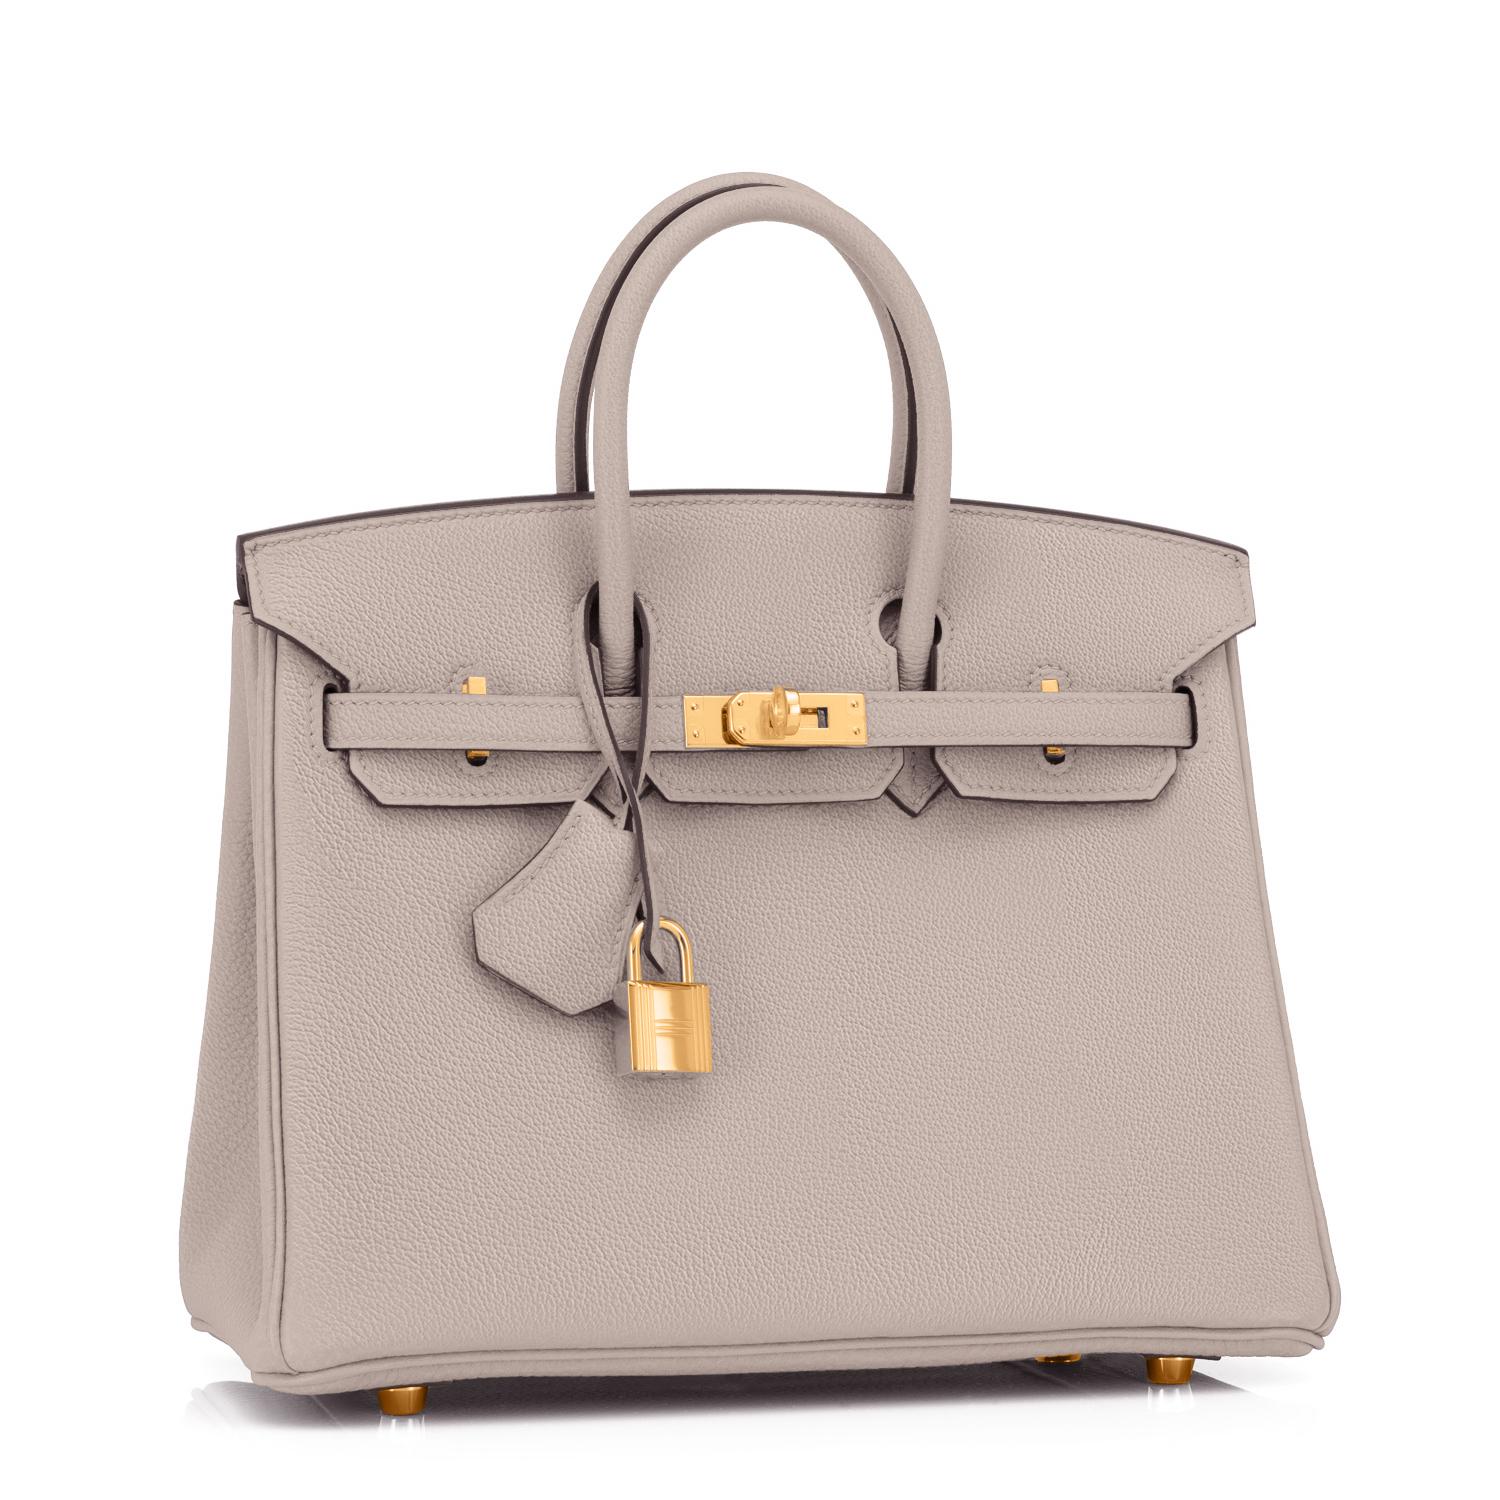 Hermes Birkin 25cm Gris Asphalte Grey Beige Bag Gold Hardware Y Stamp, 2020
Devastatingly gorgeous!  Gris Asphalte is the best neutral to come from Hermes in many years.
Just purchased from Hermes store! Bag bears new interior 2020 Y stamp.
Brand